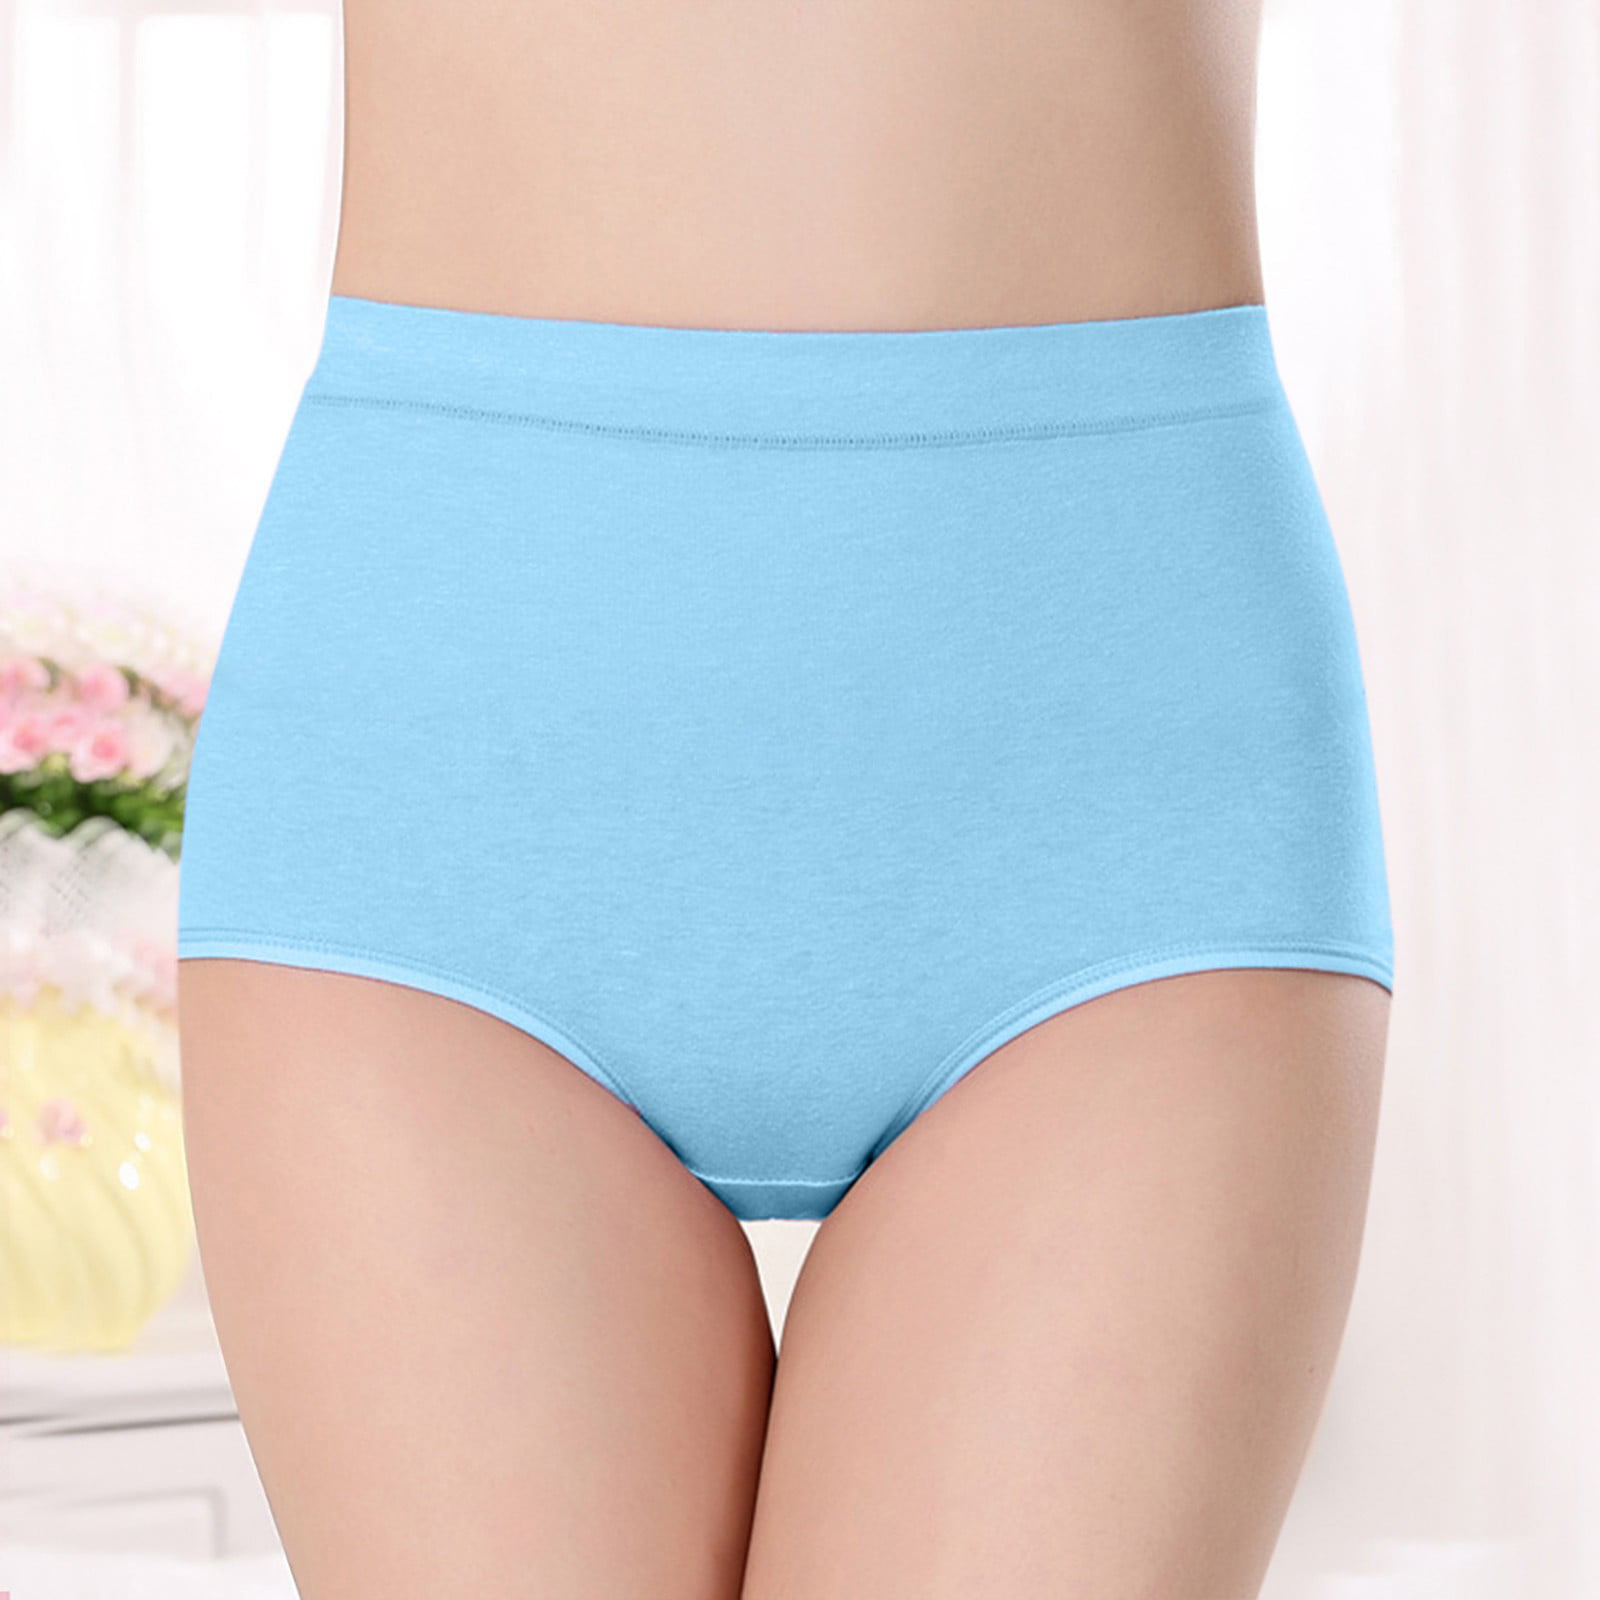 shpwfbe underwear women high waisted cotton stretch brief soft full  coverage ie bras for women lingerie for women